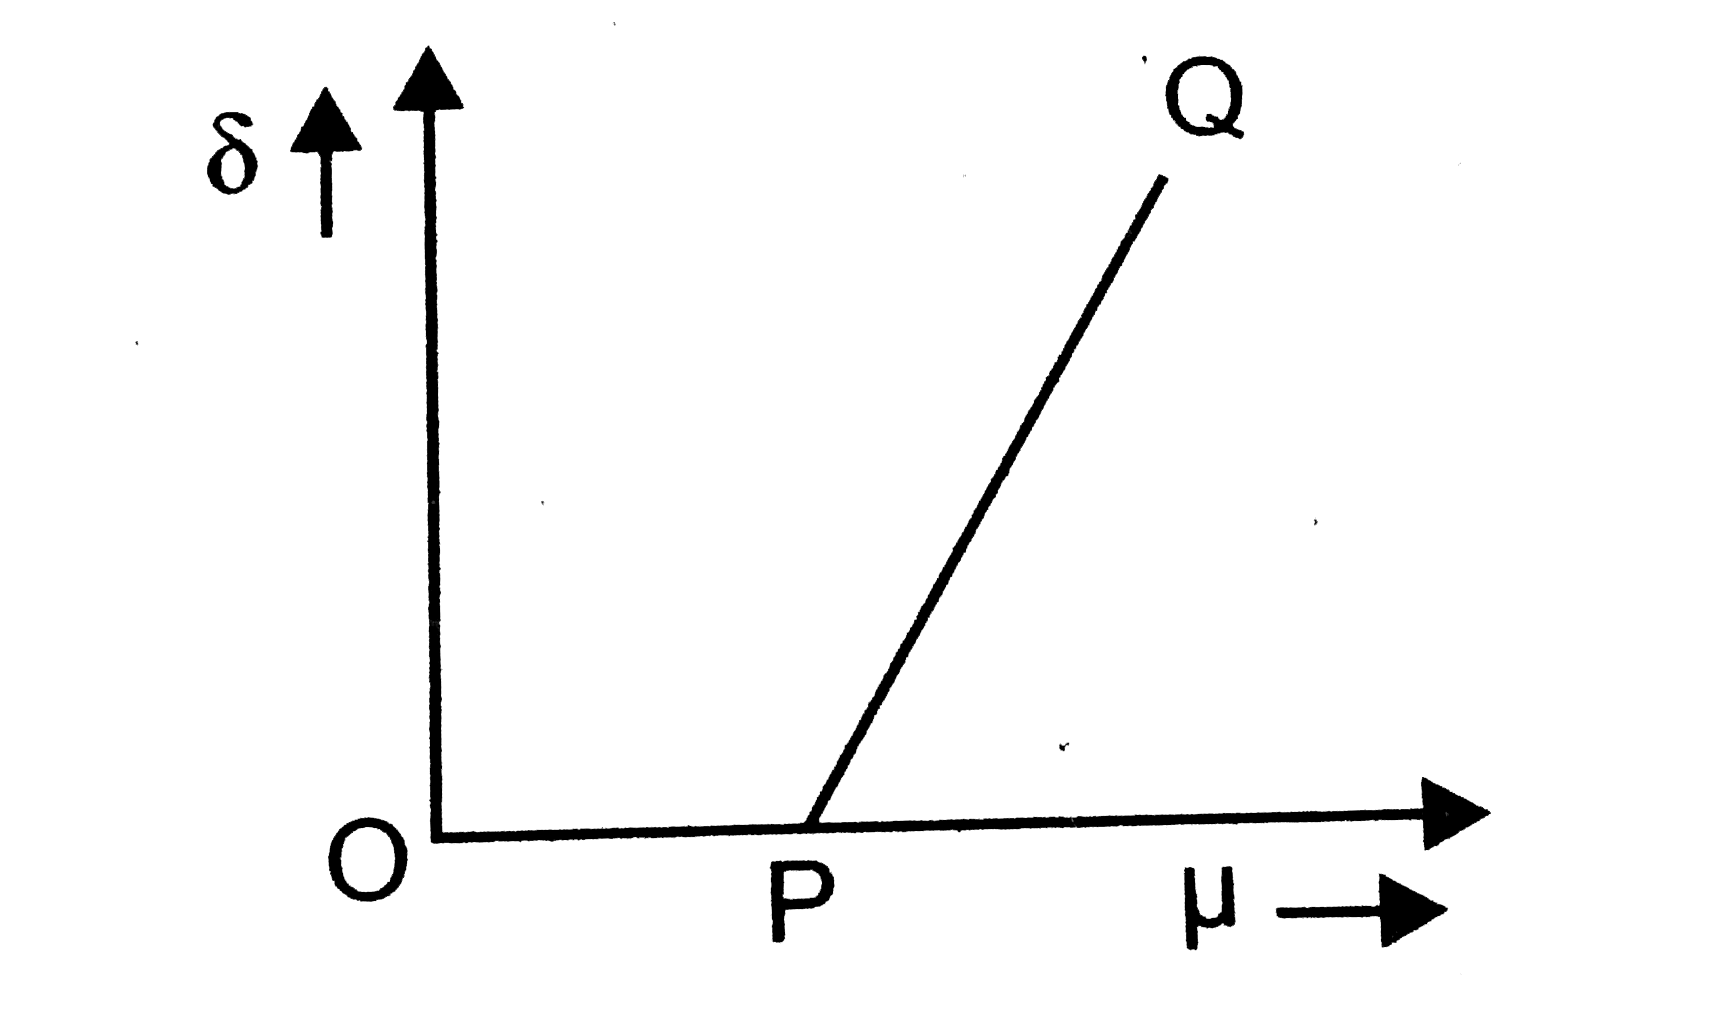 For a small angled prism, angle of prism A of minimum deviation(delta) varies with the refractive index of the prism as shown in the graph